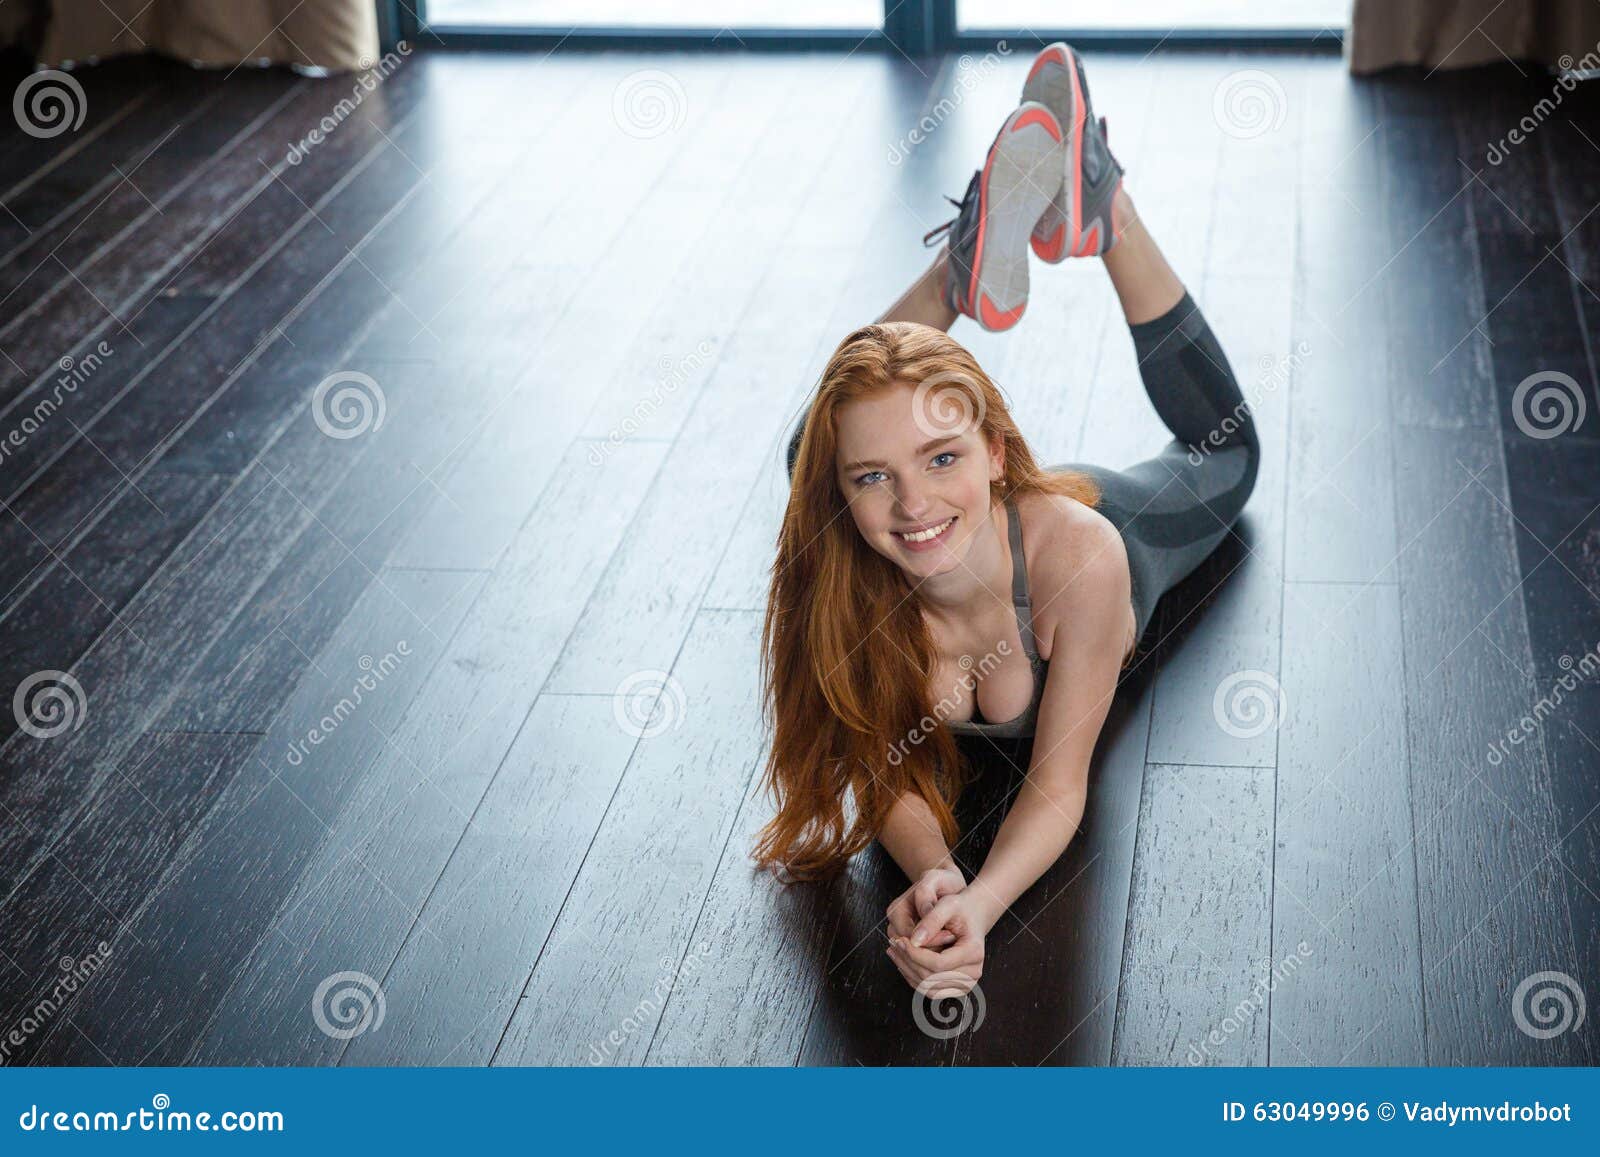 smiling redhead woman lying on the floor